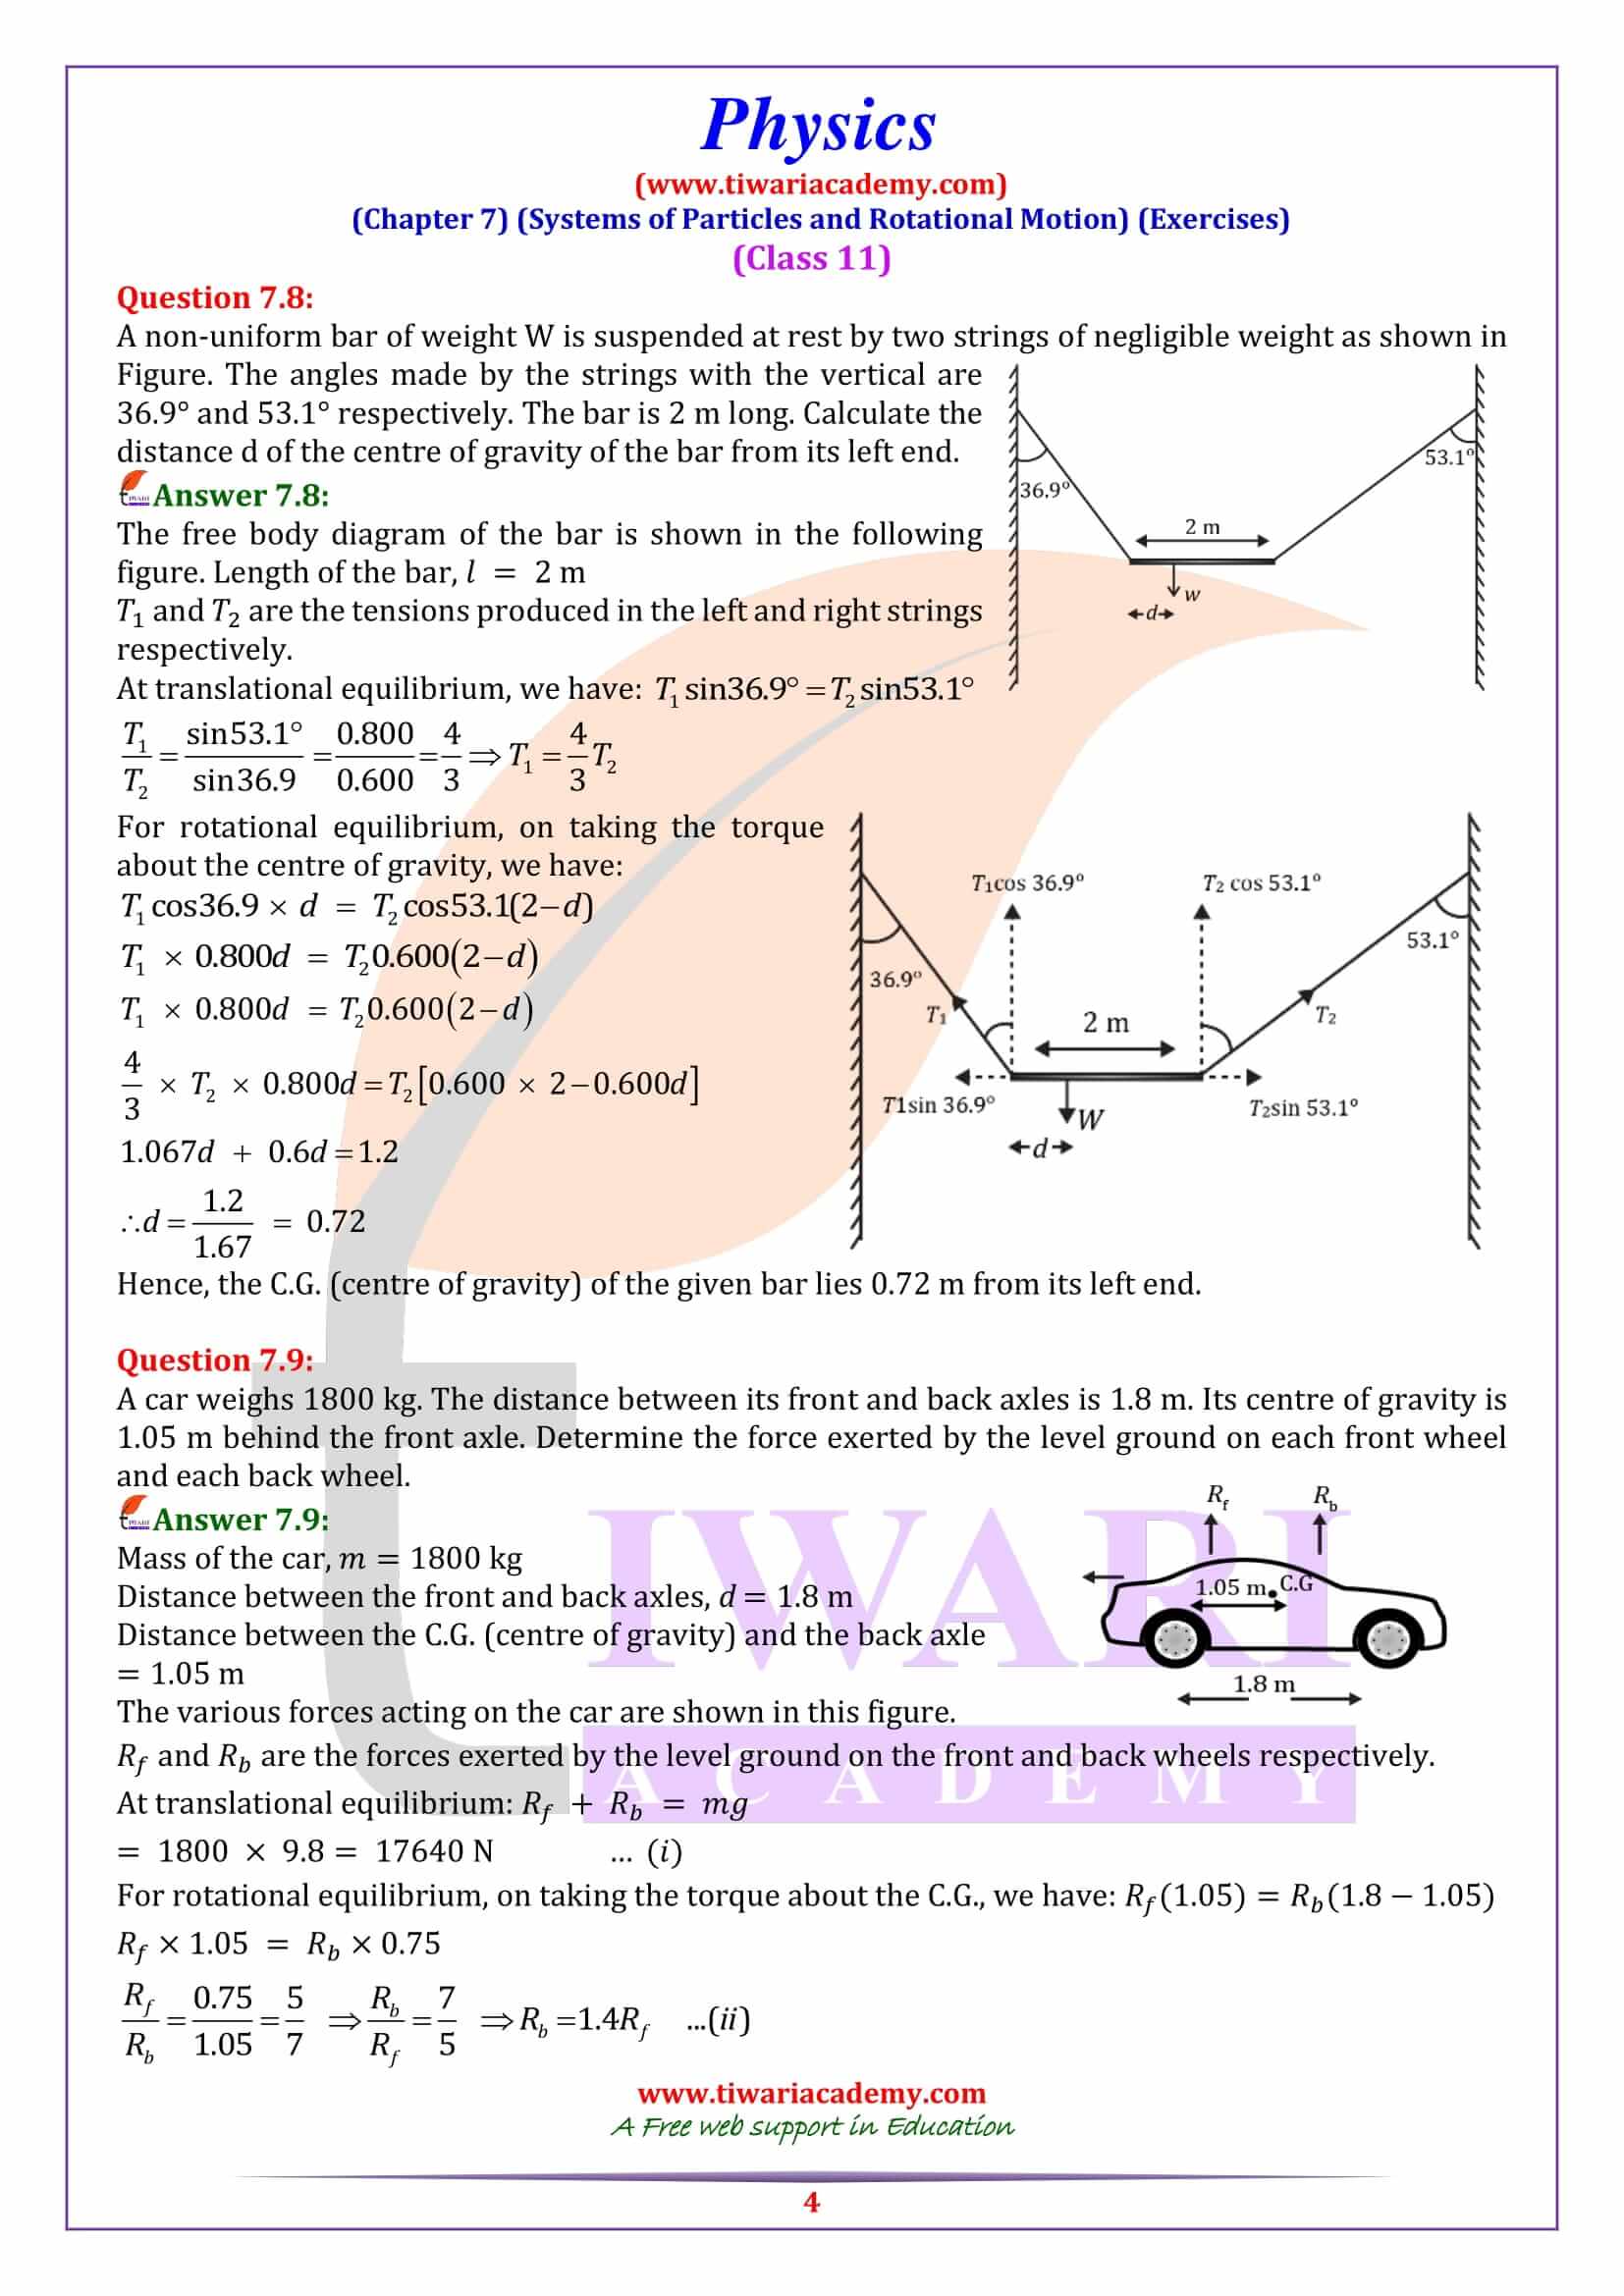 Class 11 Physics Chapter 7 Exercises NCERT answers